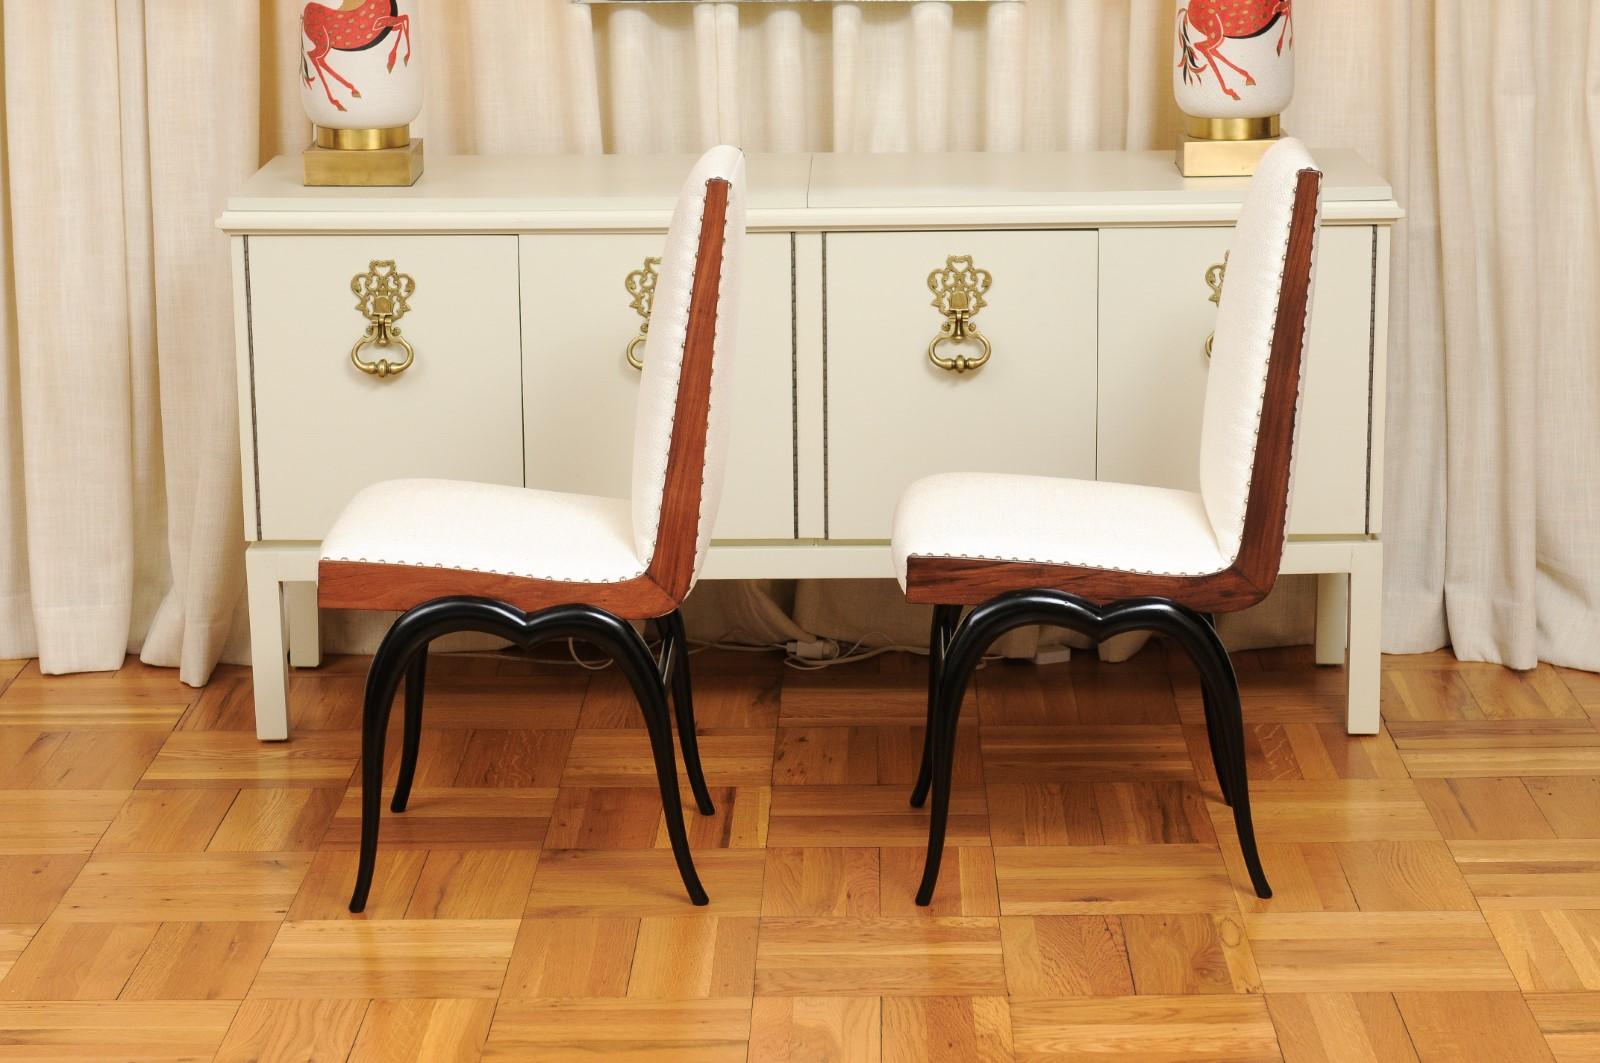 Breathtaking Set of 16 Walnut and Mahogany Dining Chairs, Brazil, circa 1955 For Sale 7